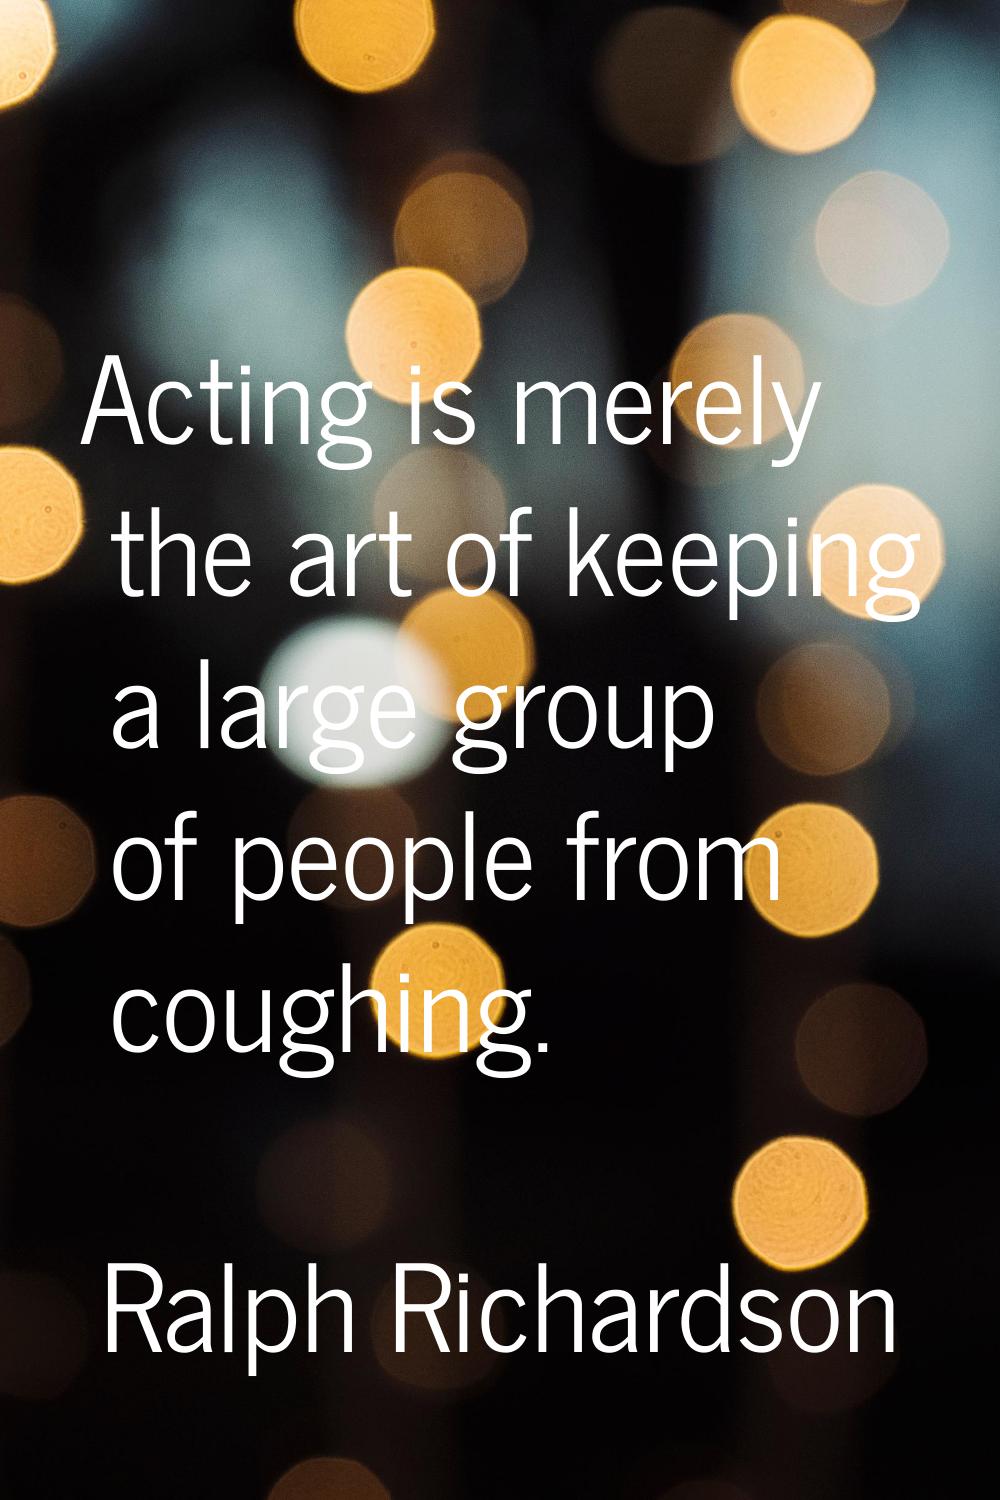 Acting is merely the art of keeping a large group of people from coughing.